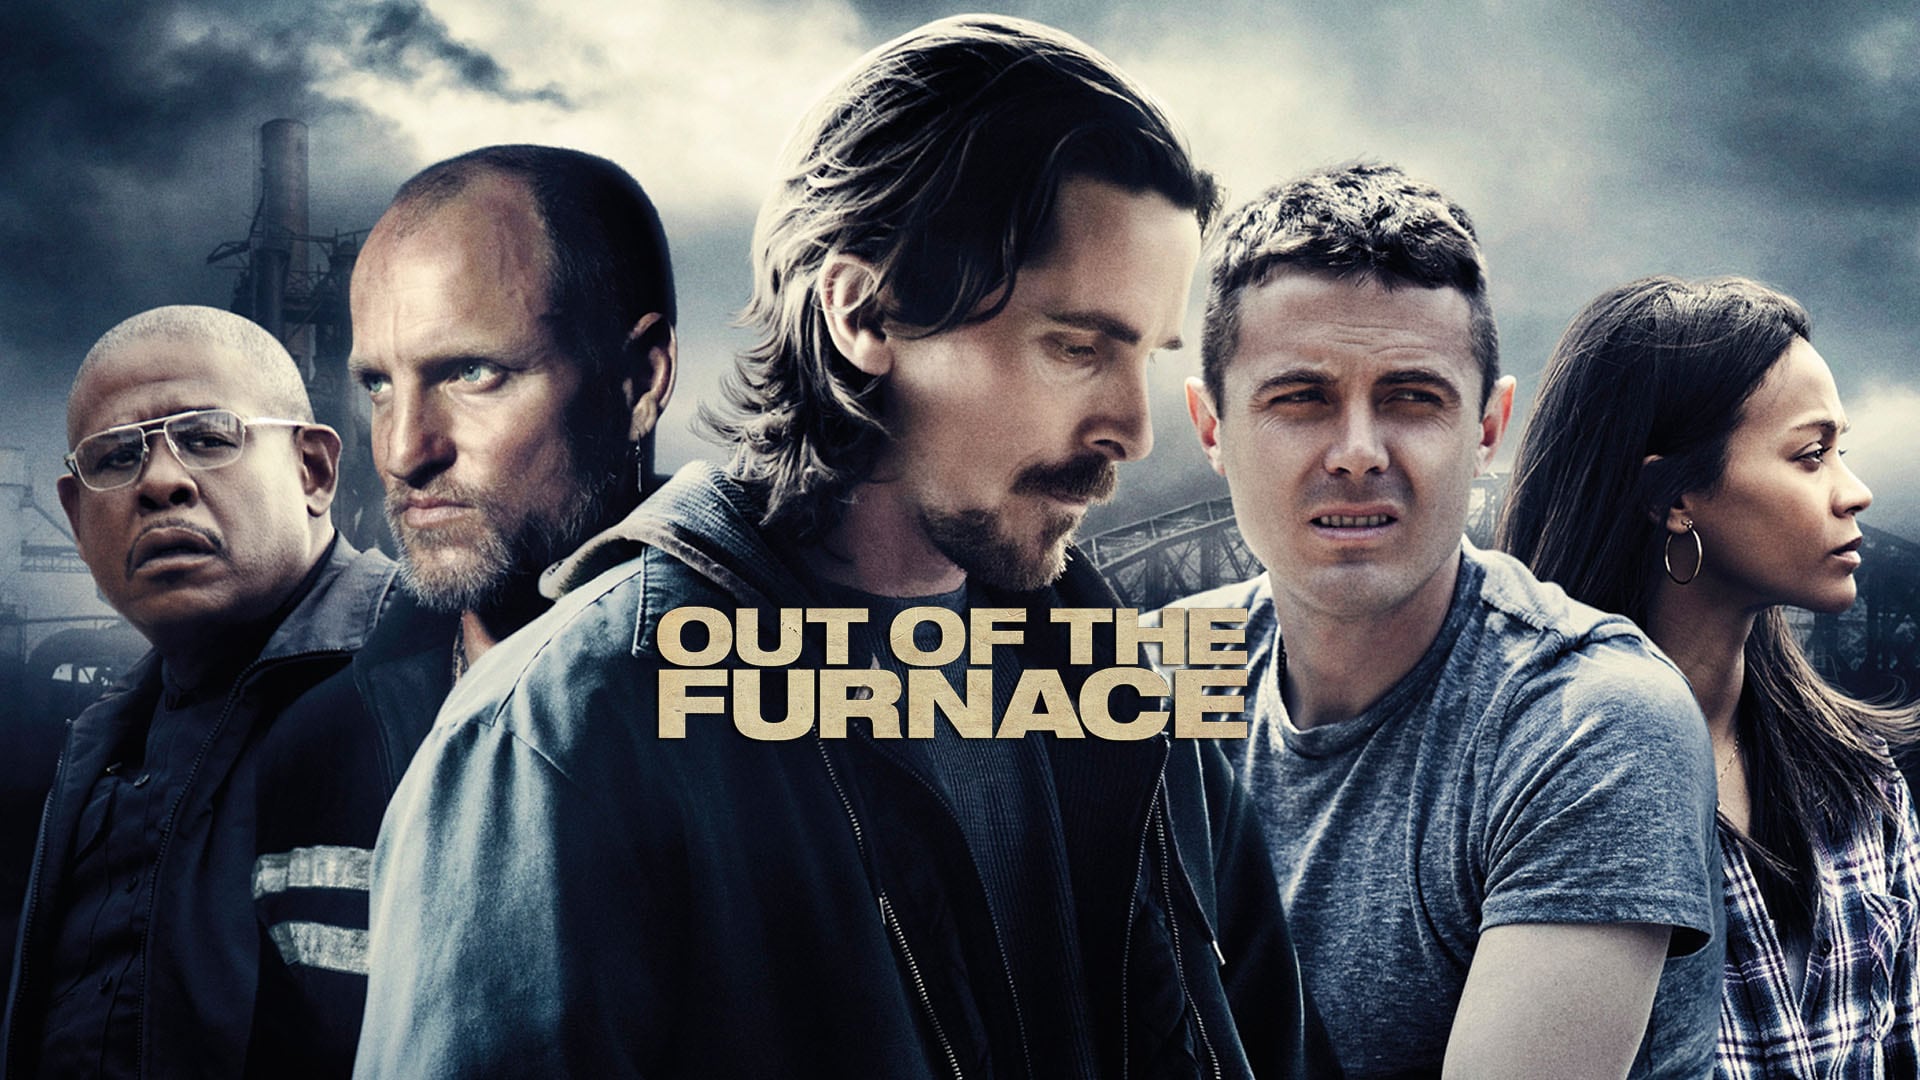 Watch Out of the Furnace Online | Stream Full Movies